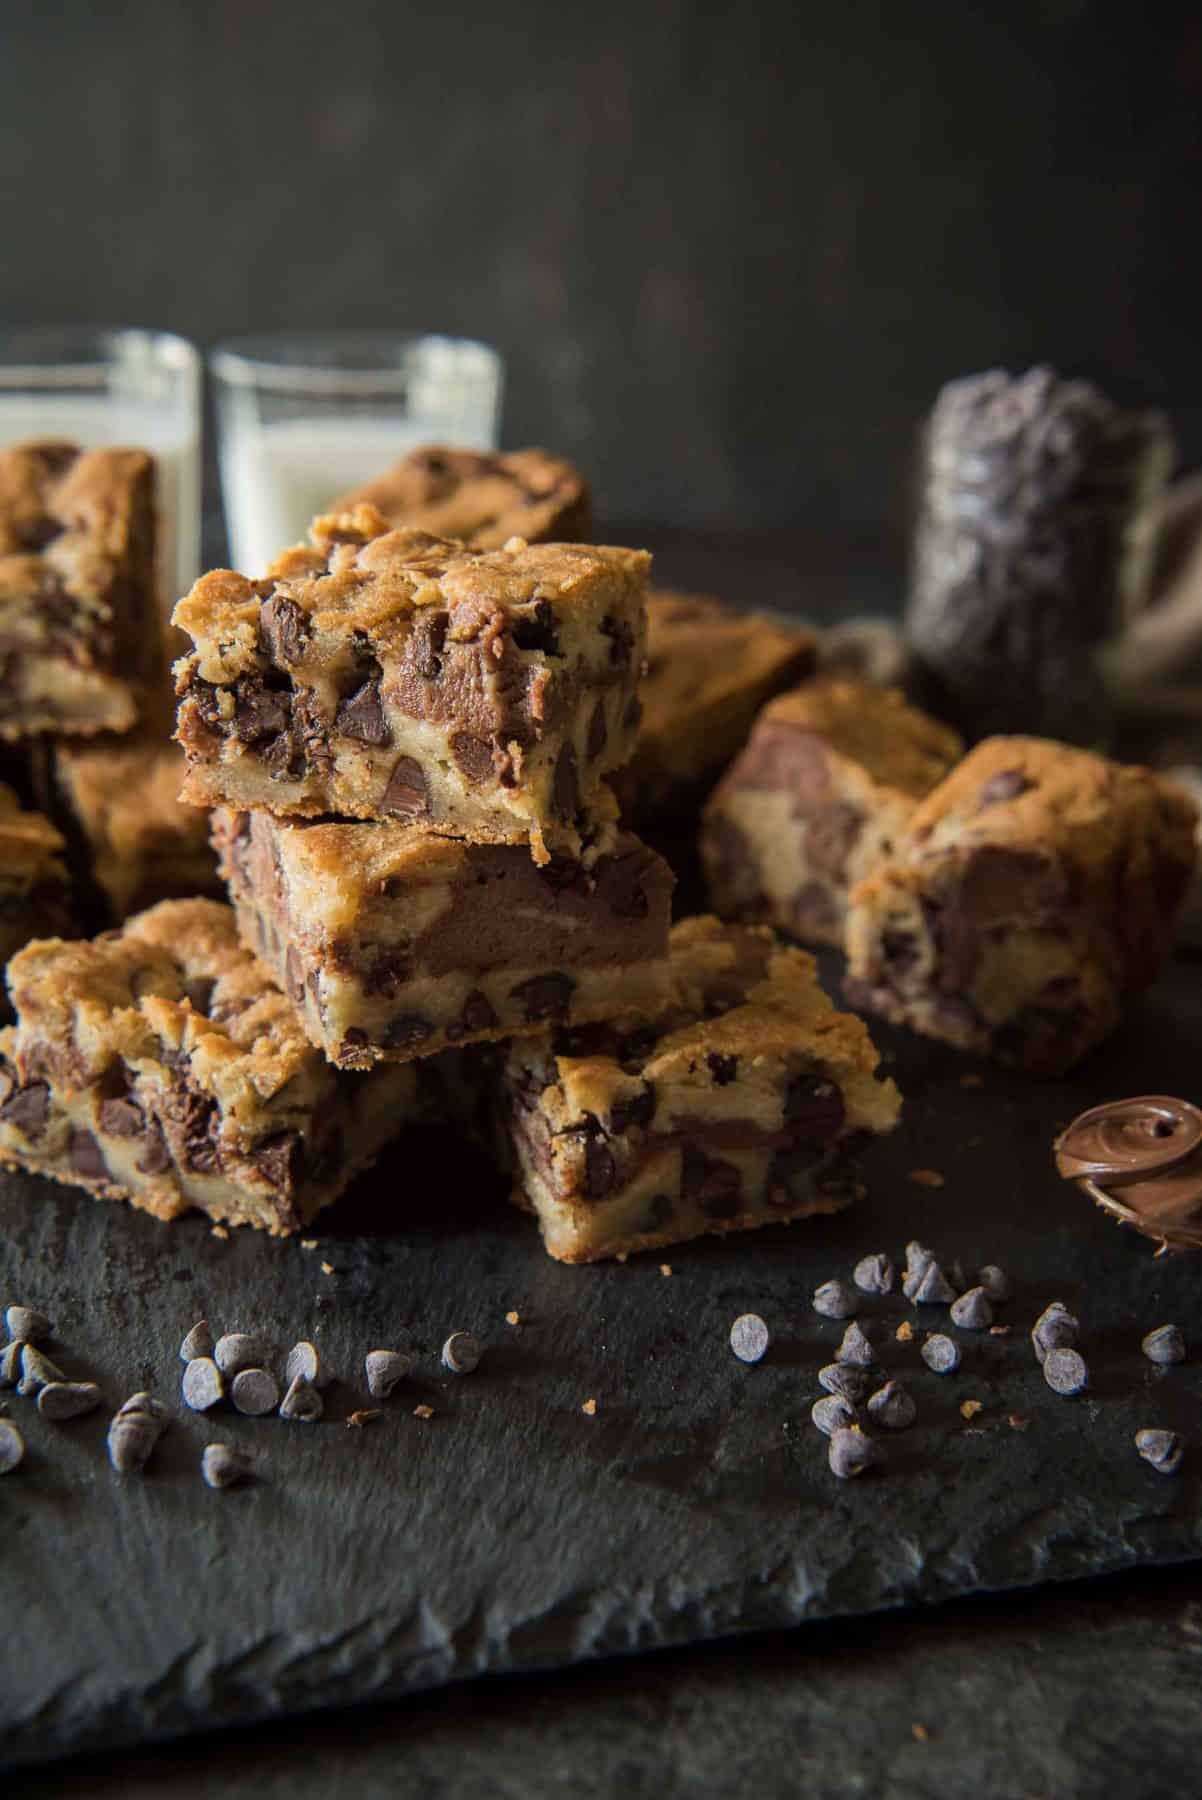 Not a cookie, not a brownie: these Nutella Chocolate Chip Cookie Dough Bars are the softest, chewiest, gooey-est best of both worlds!